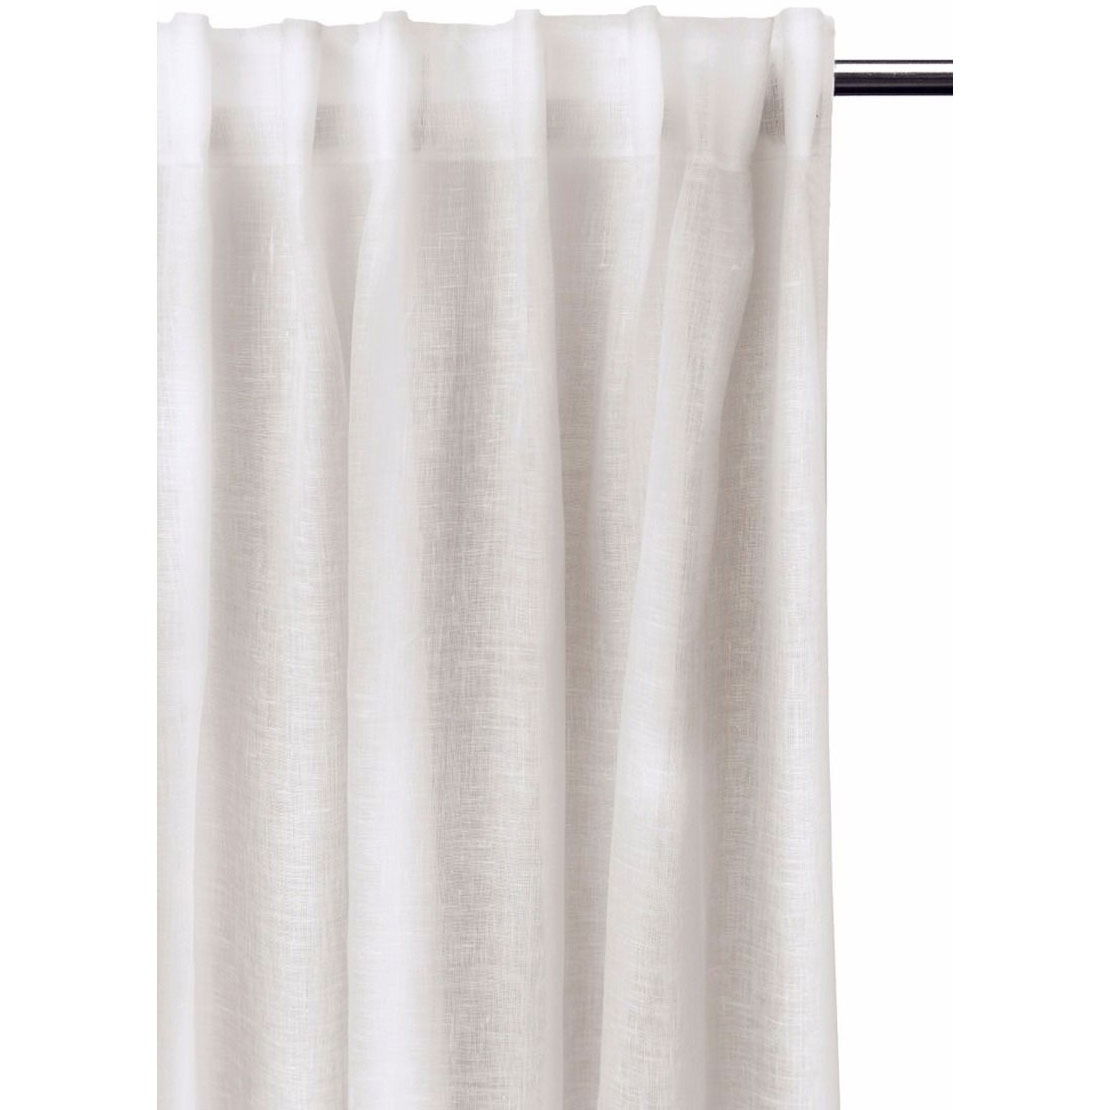 Dalsland Curtain With Heading Tape 145x290 cm, White